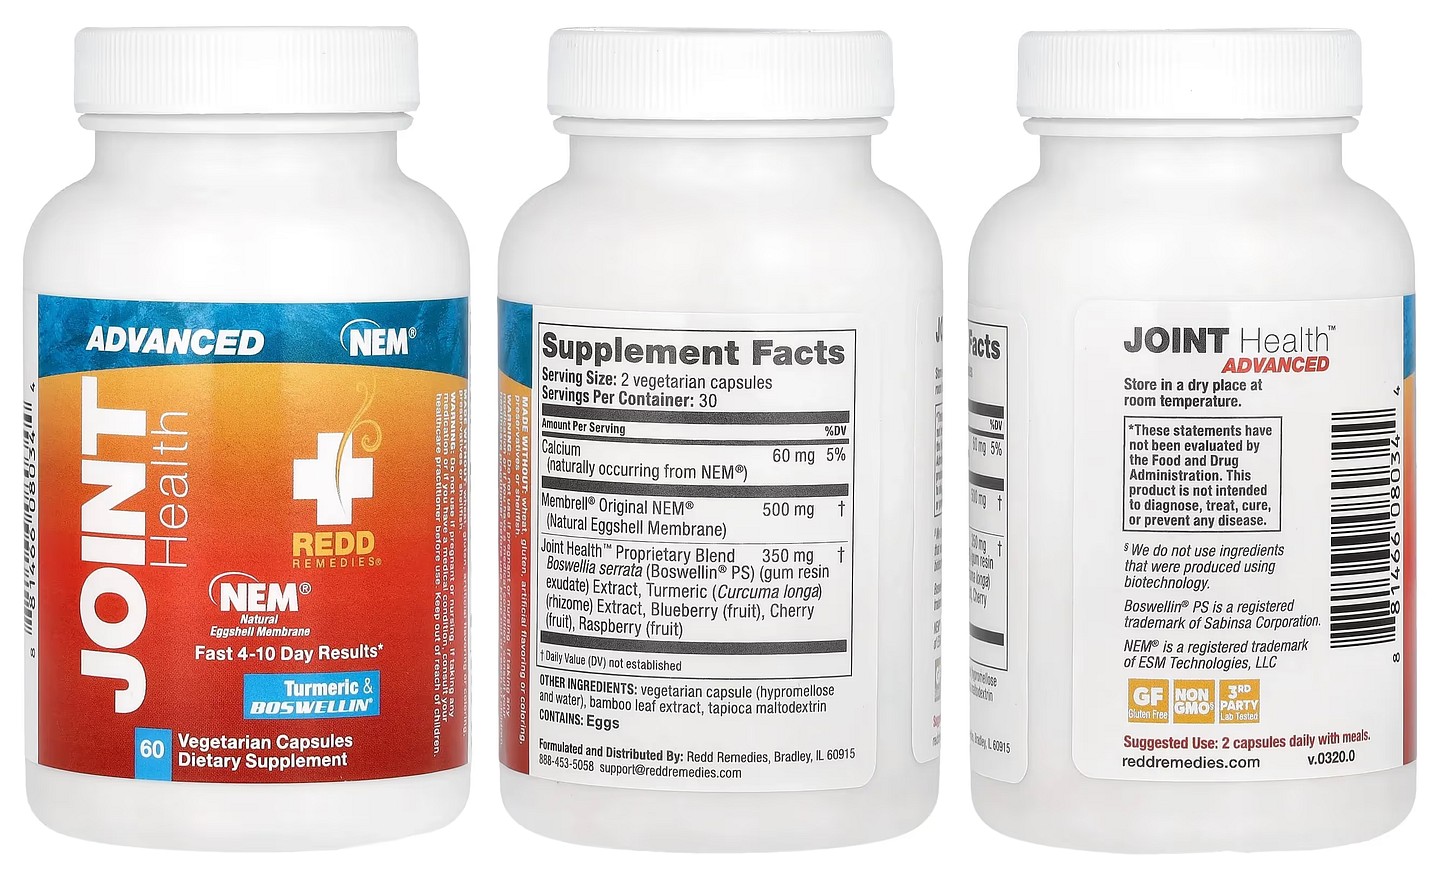 Redd Remedies, Joint Health, Advanced packaging